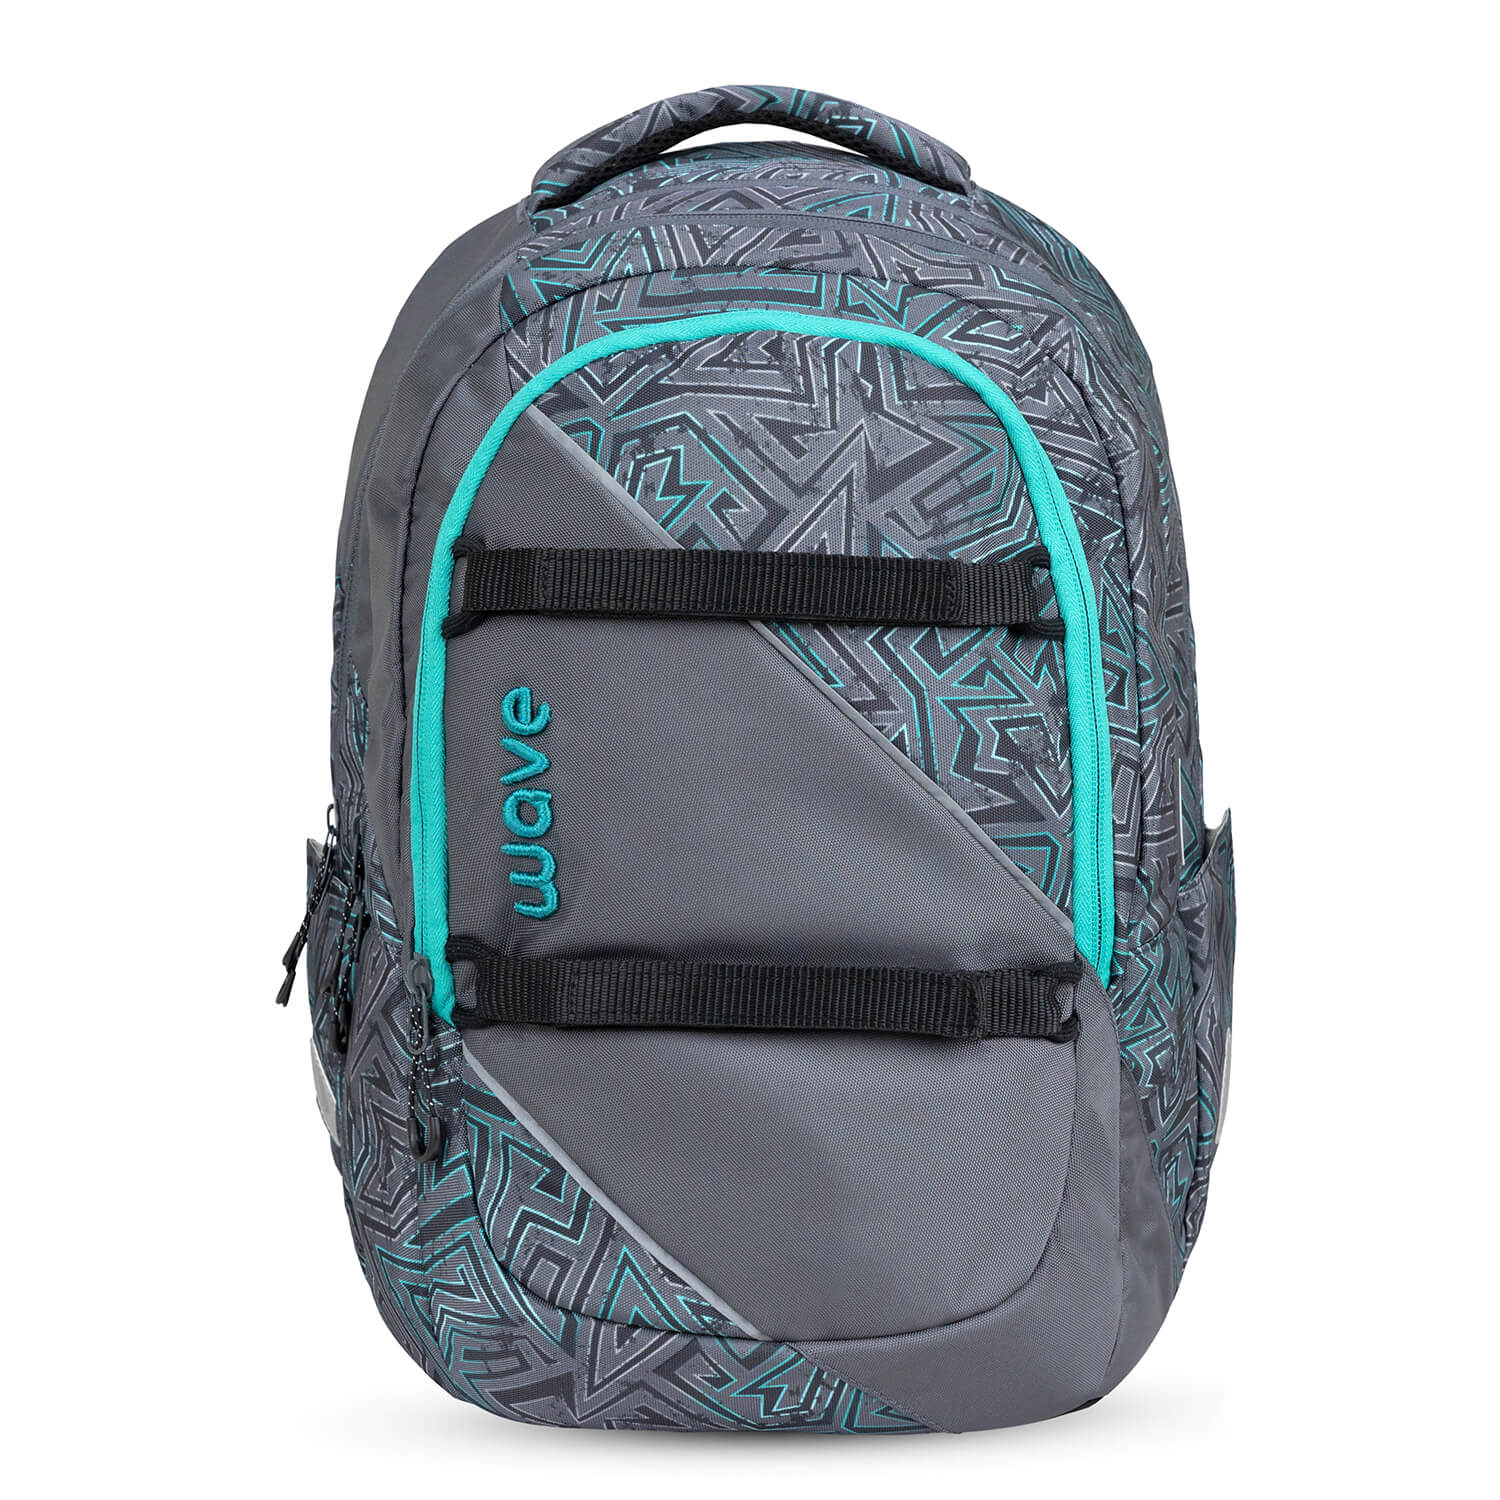 Wave Prime Chaos Lagoon school backpack